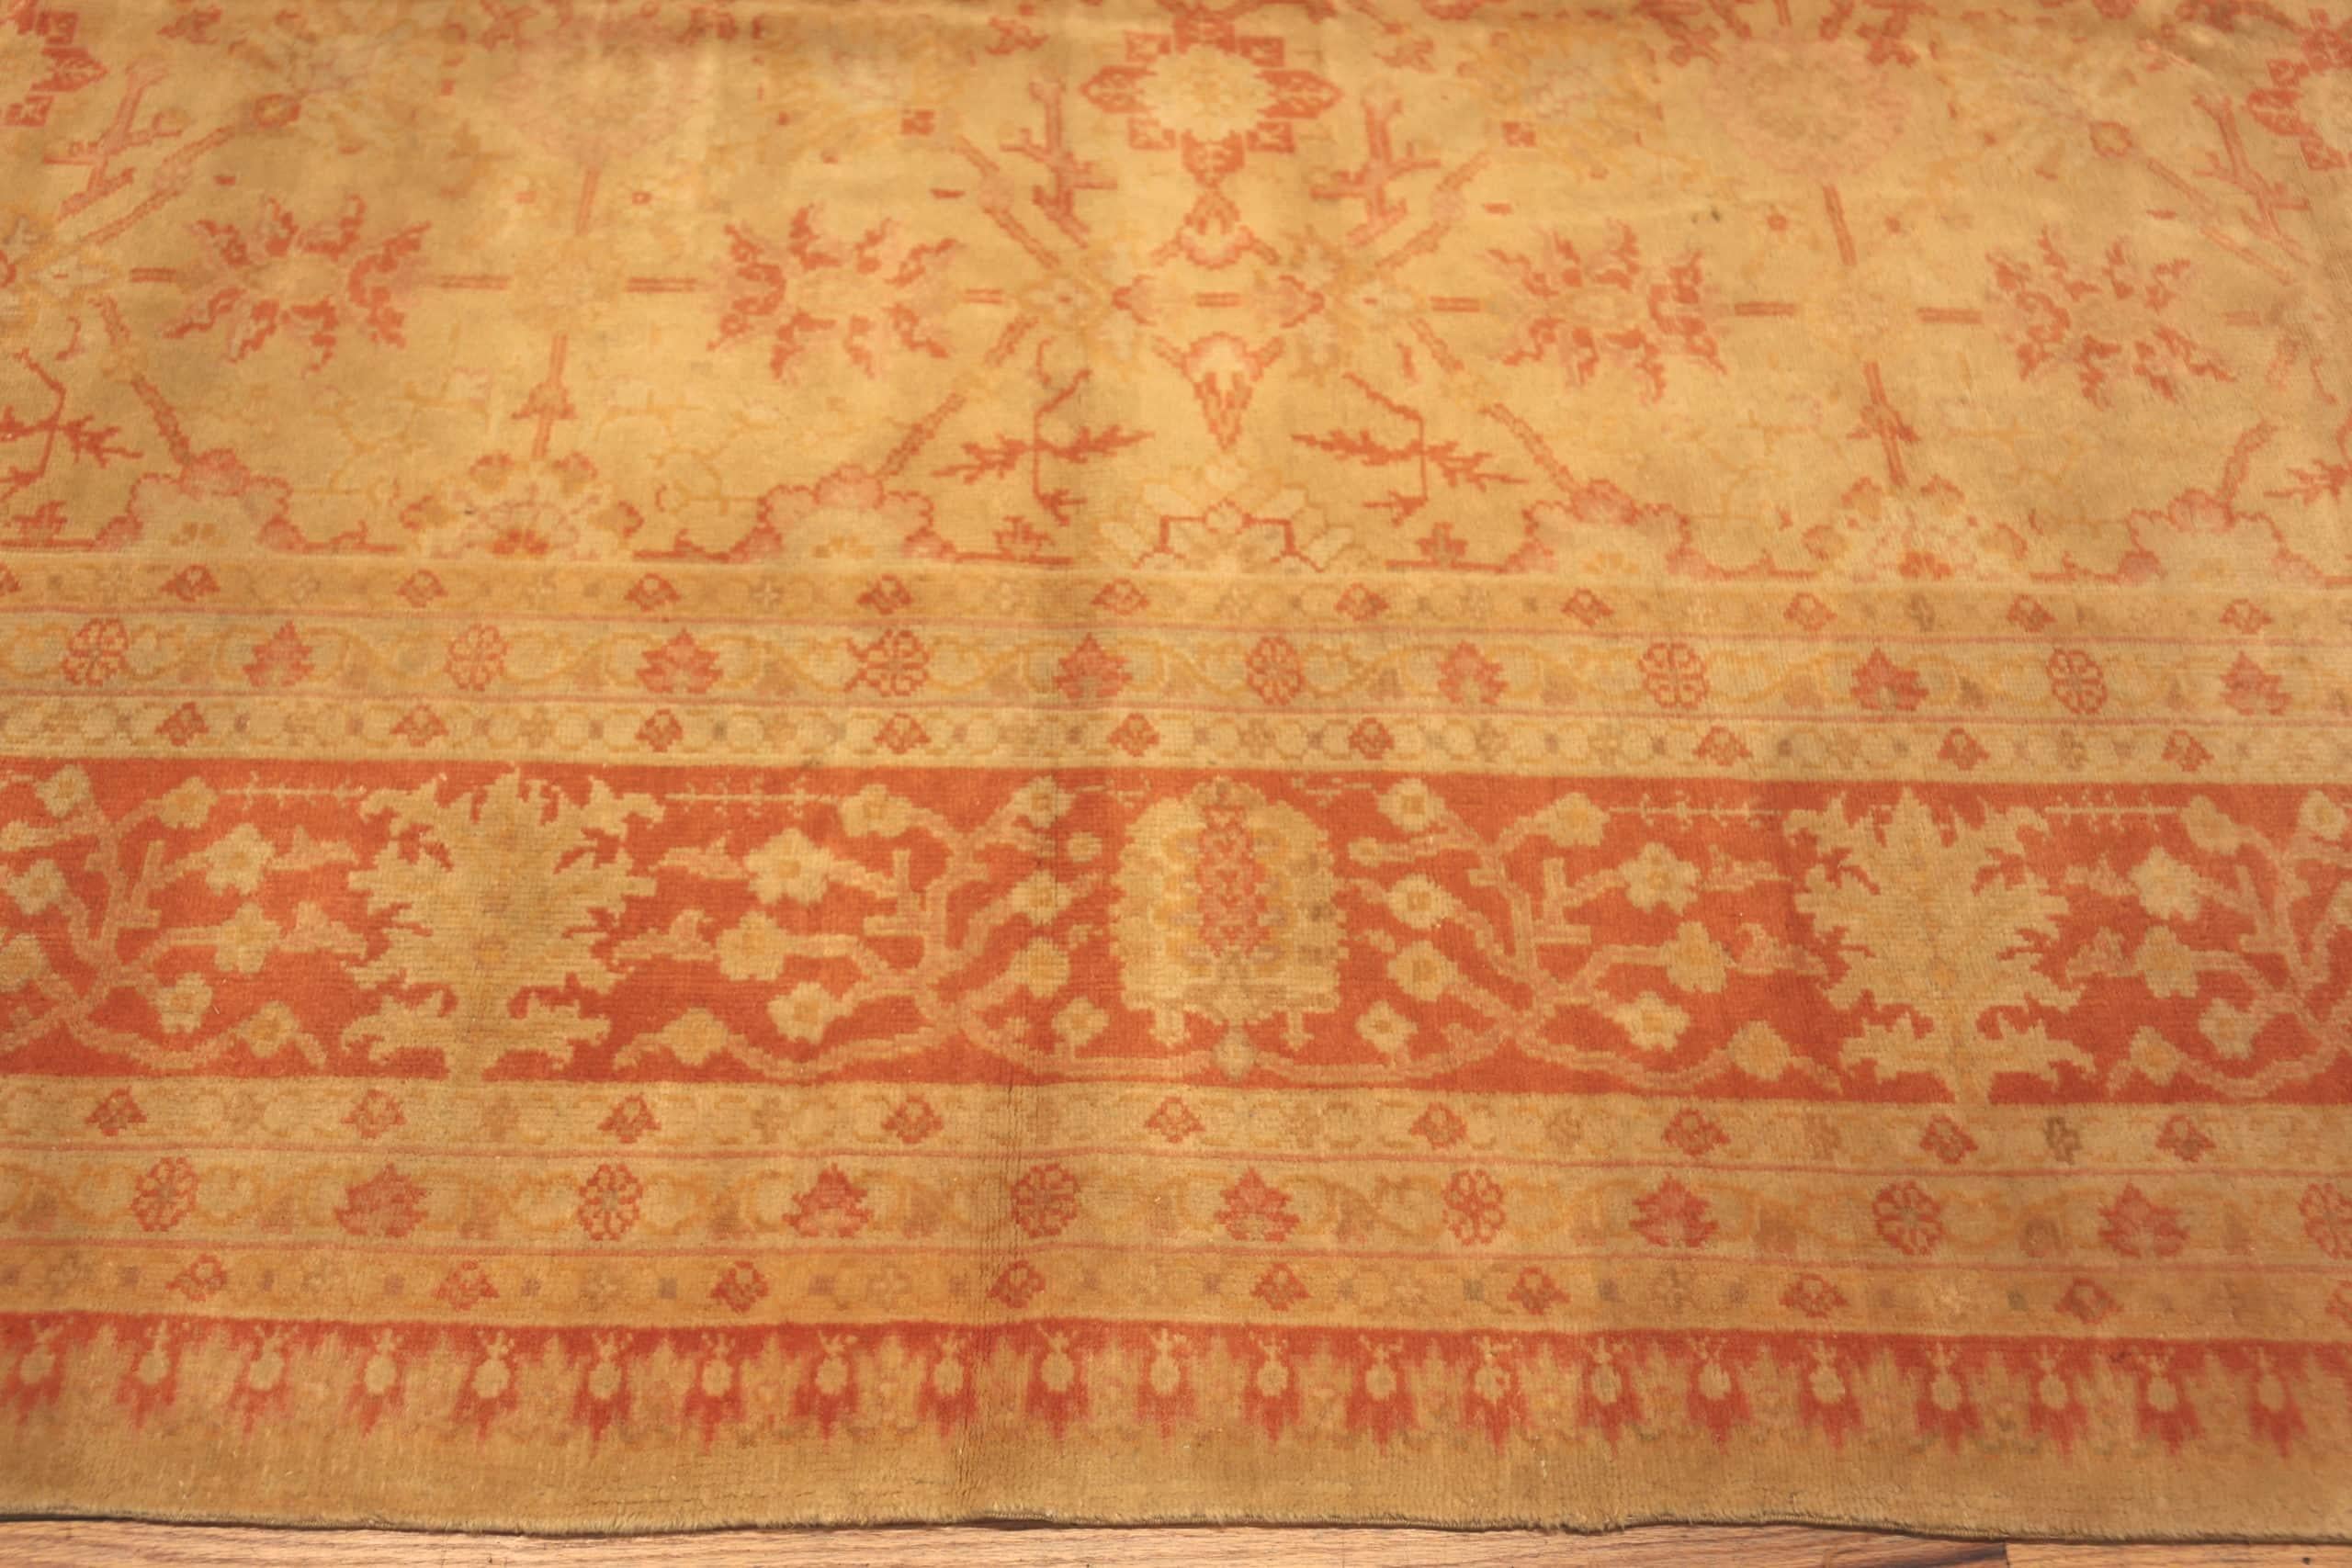 Decorative Antique Luxurious Turkish Oushak Warm Tone Allover Rug, Country of Origin: Turkey, Circa date: 1900. Size: 11 ft 2 in x 14 ft 2 in (3.4 m x 4.32 m)